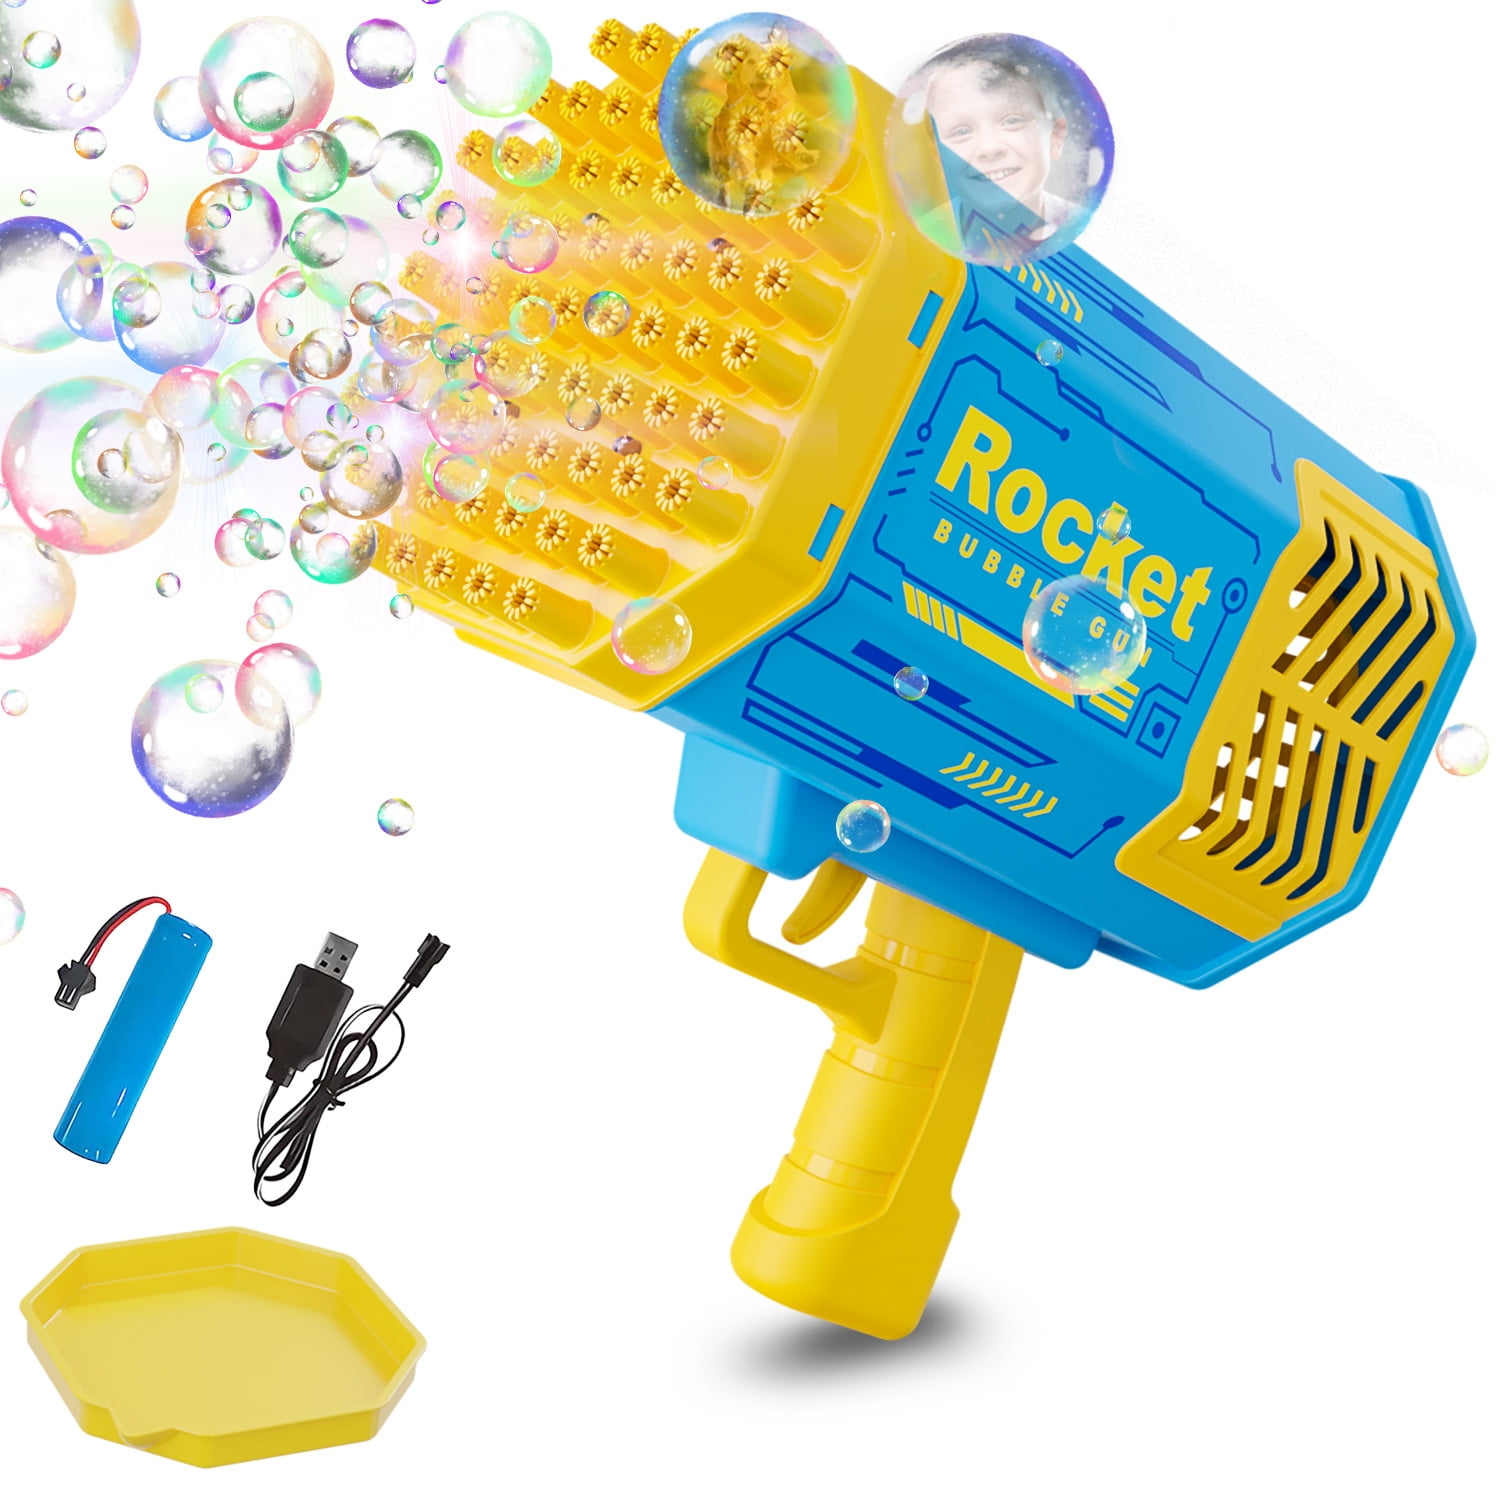 NAPEI Big Bubble Machine , 69 Holes Bubble Gun Toys with Colorful Lights ,  Rocket Launcher Bubble Maker for Wedding Party Birthday Gift (Blue) 